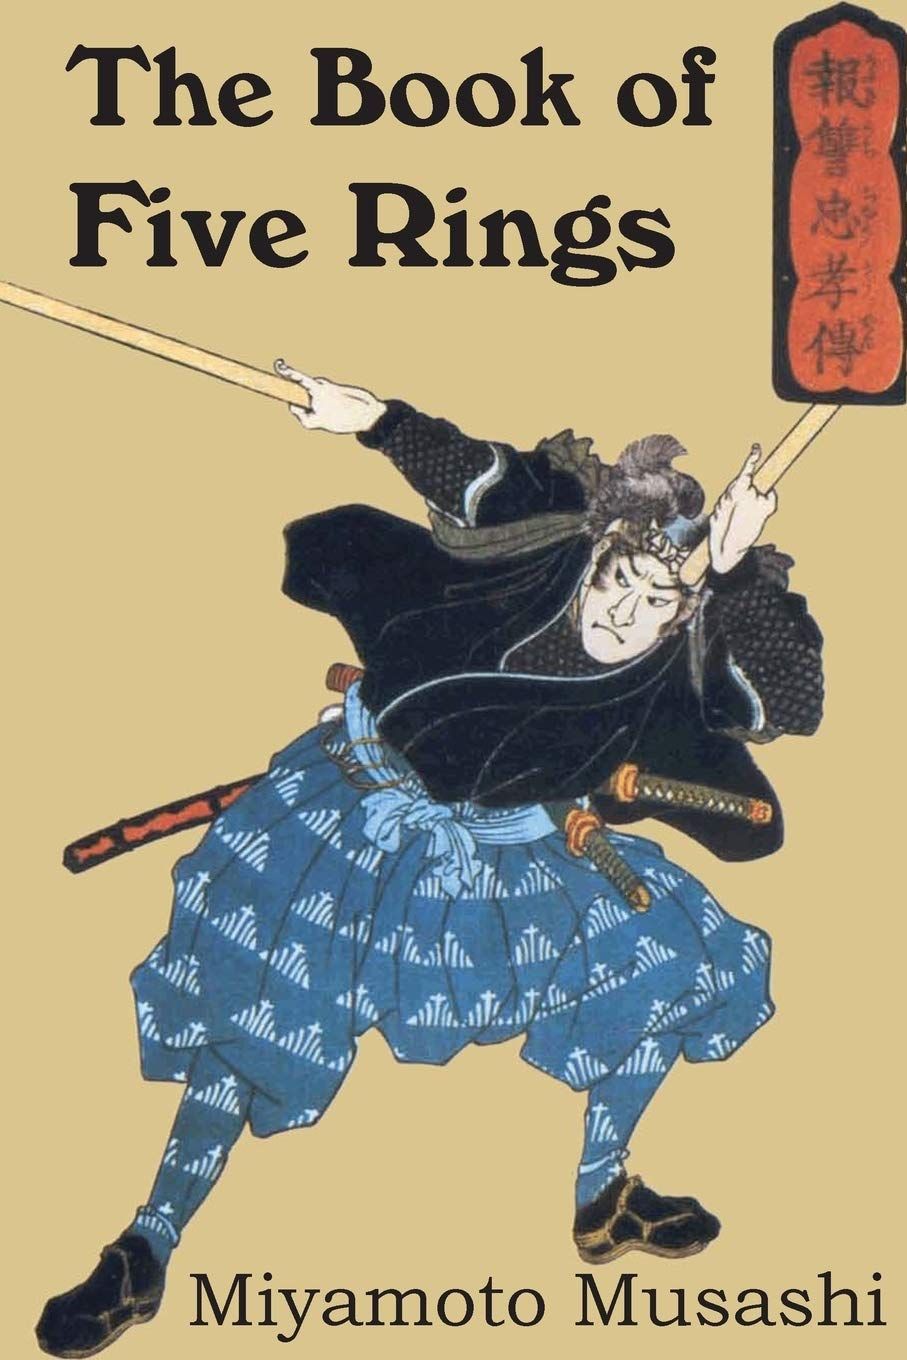 Book "The Book of Five Rings"